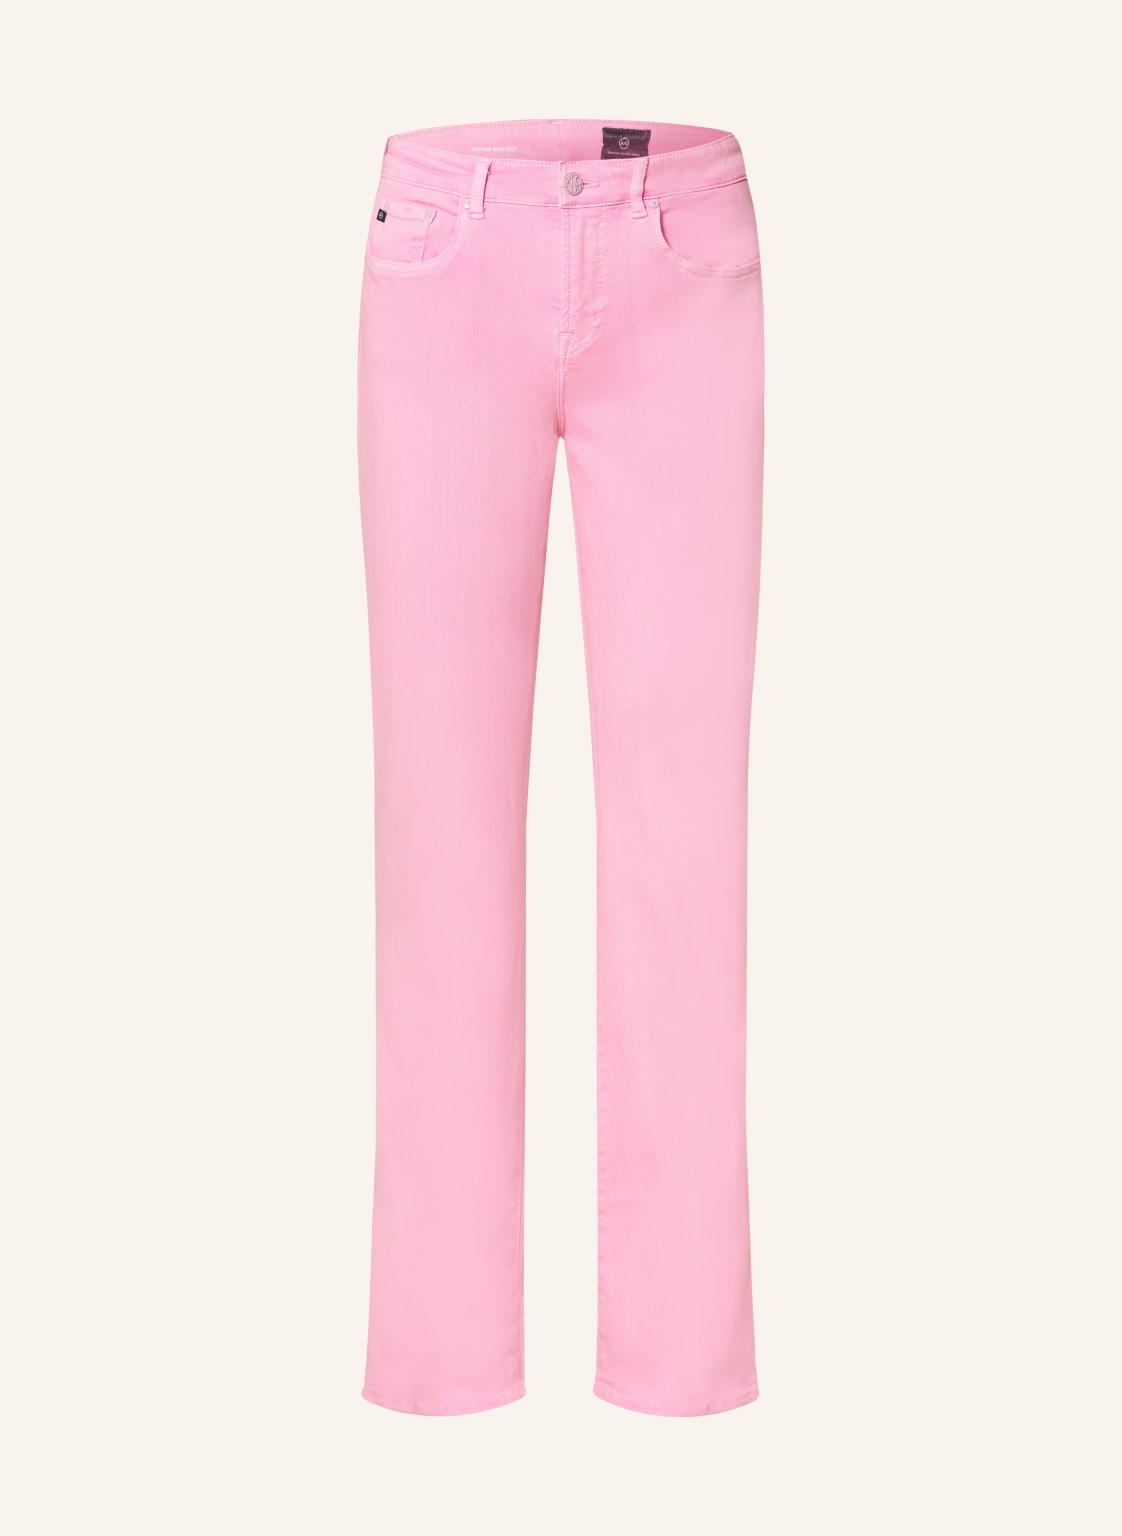 Ag Jeans Bootcut Jeans Sophie pink von ag jeans